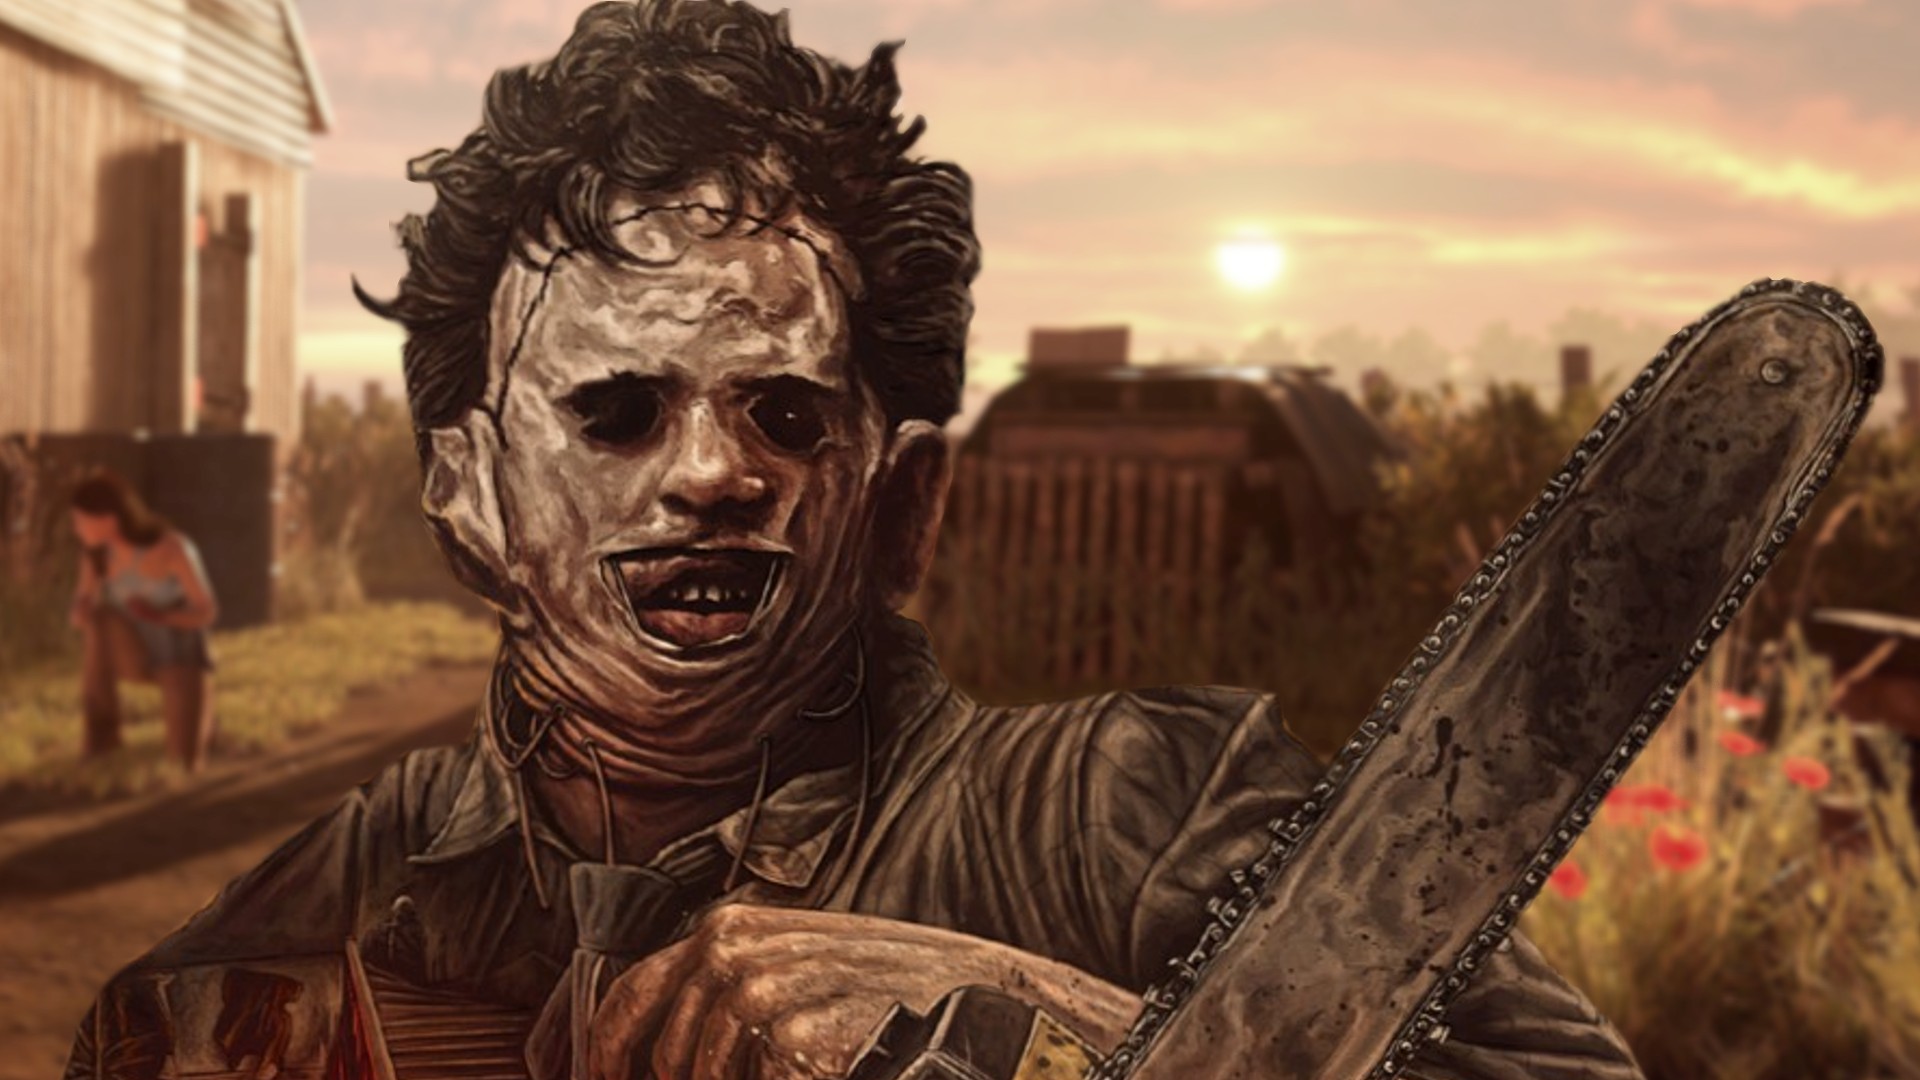 Why is Leatherface the worst Texas Chain Saw Massacre killer?